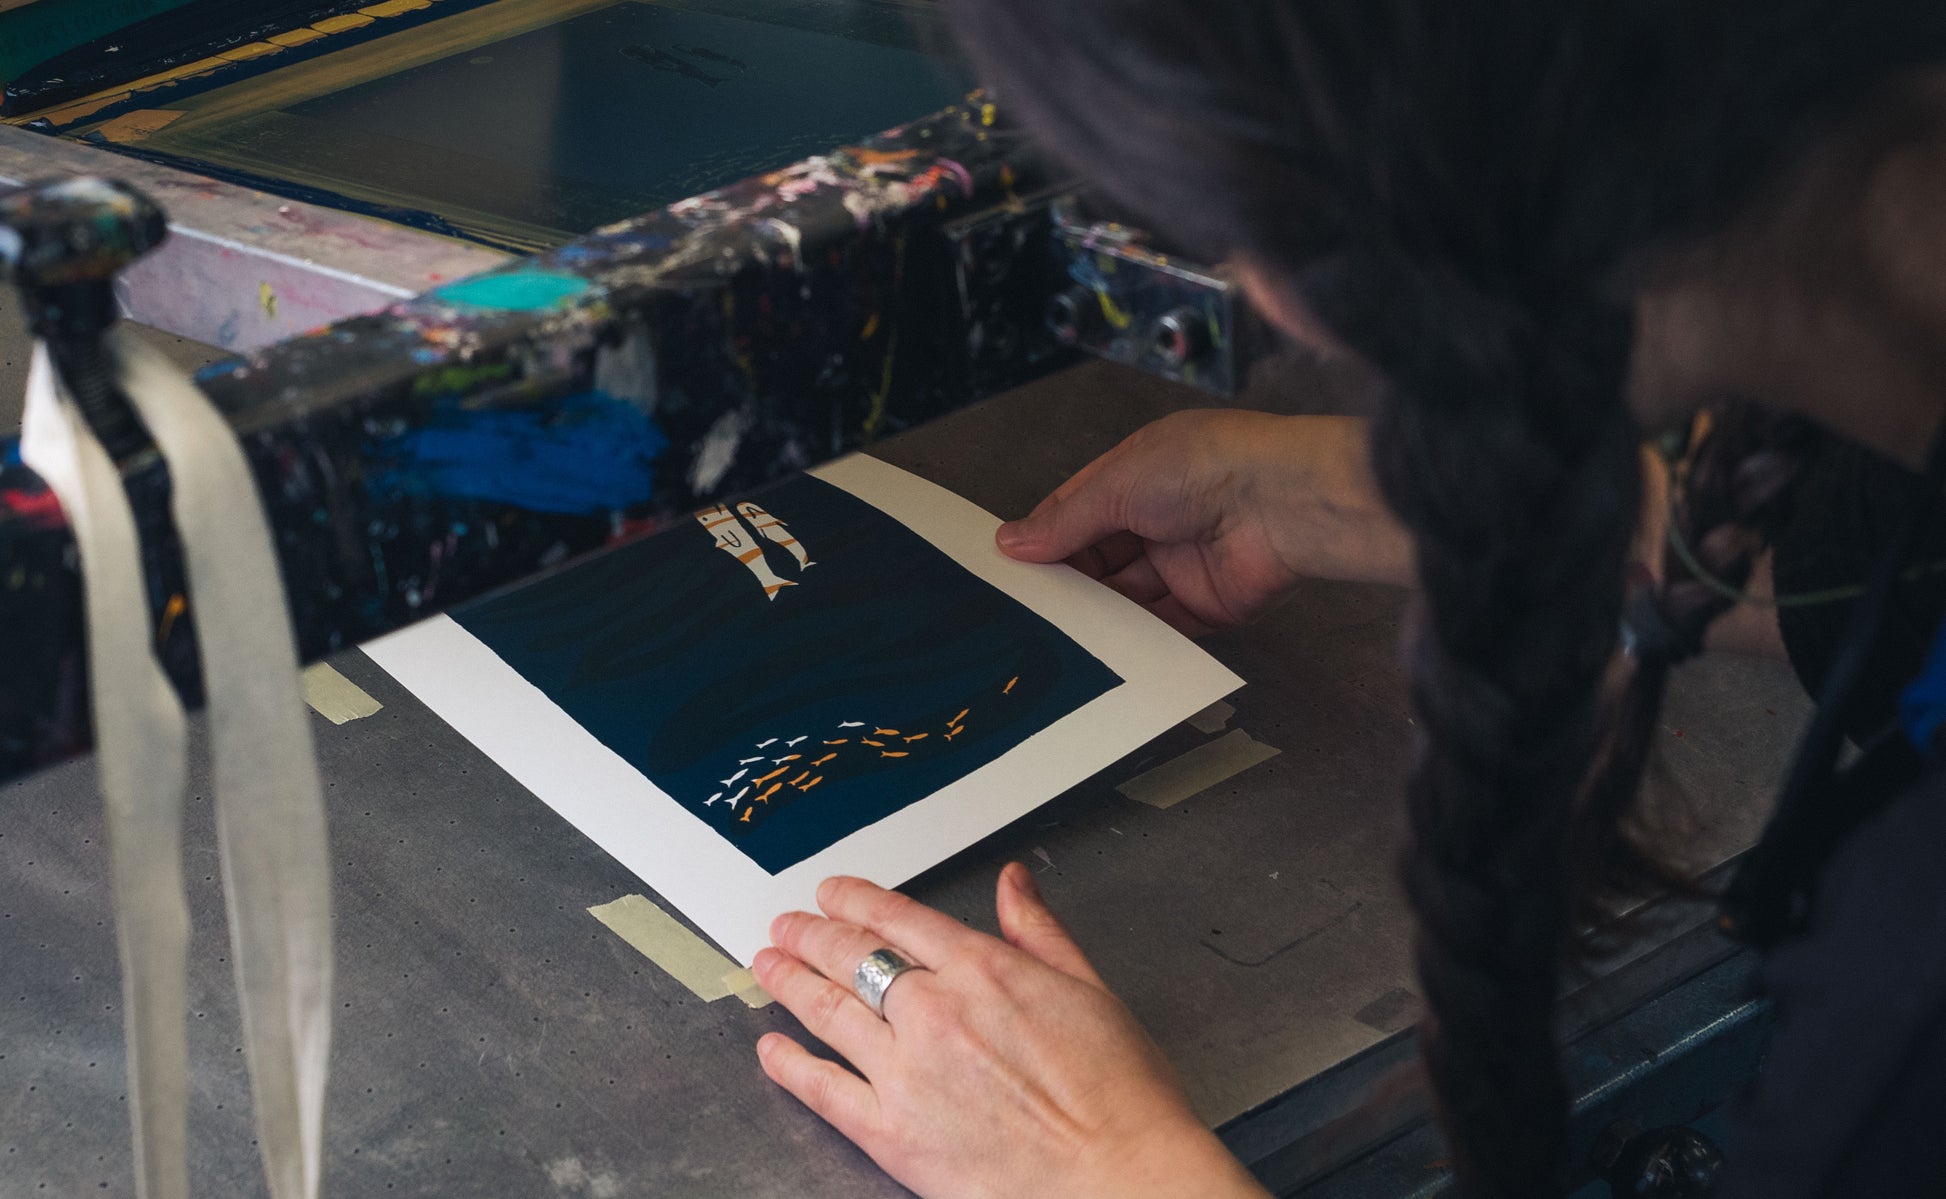 "Screen Print Your Own Textile Designs" Workshop with Julie in Berlin, Germany